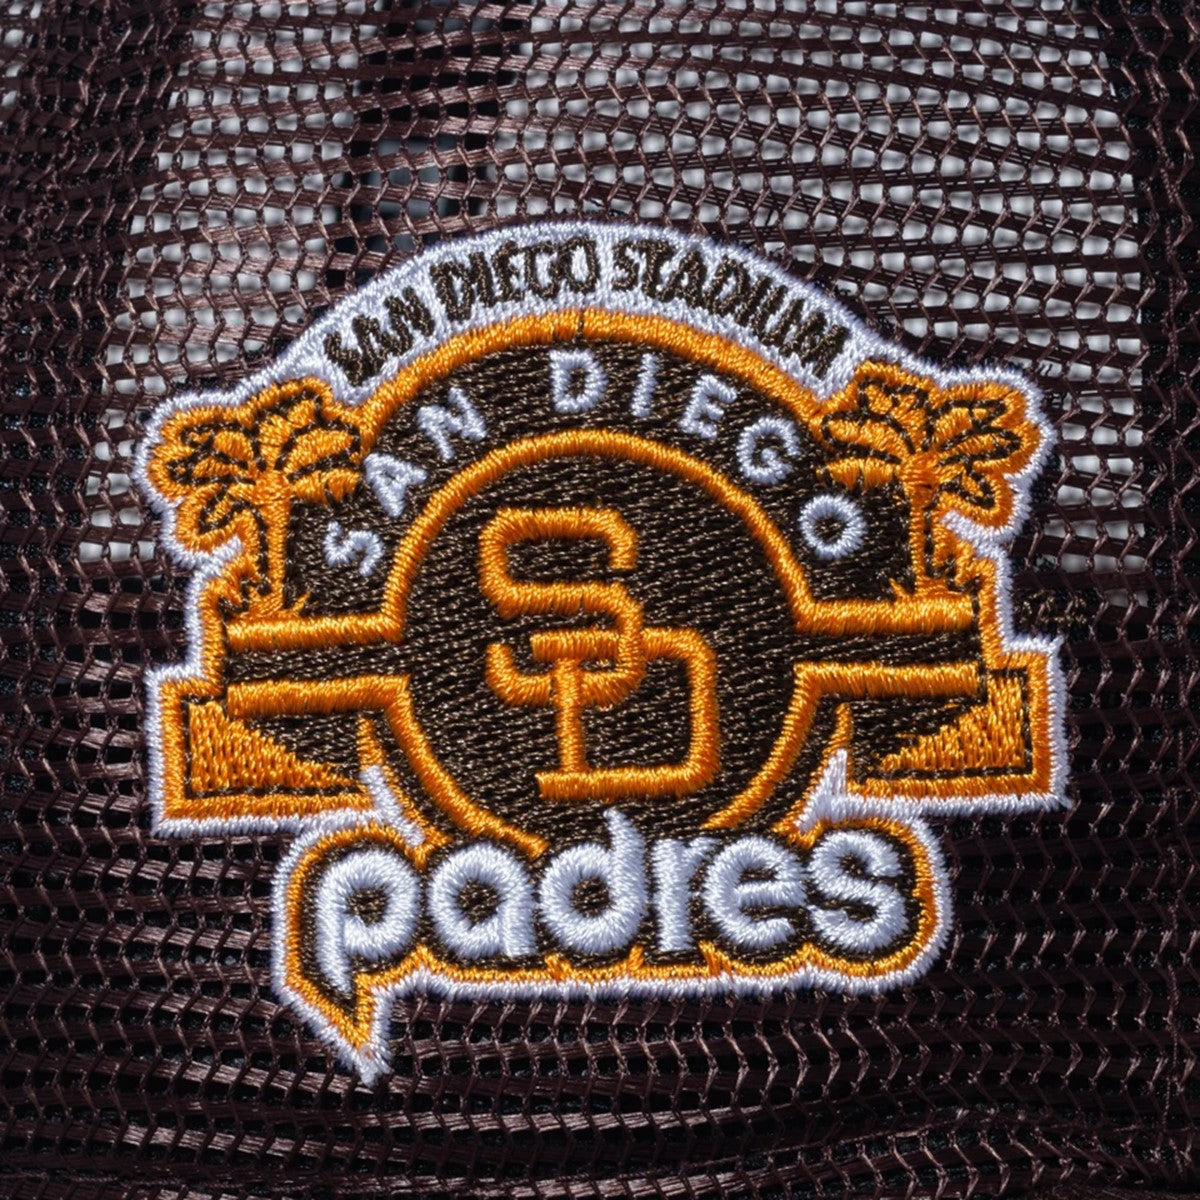 NEW ERA San Diego Padres - 9FIFTY ALL MESH SP BWOOD【14109642】